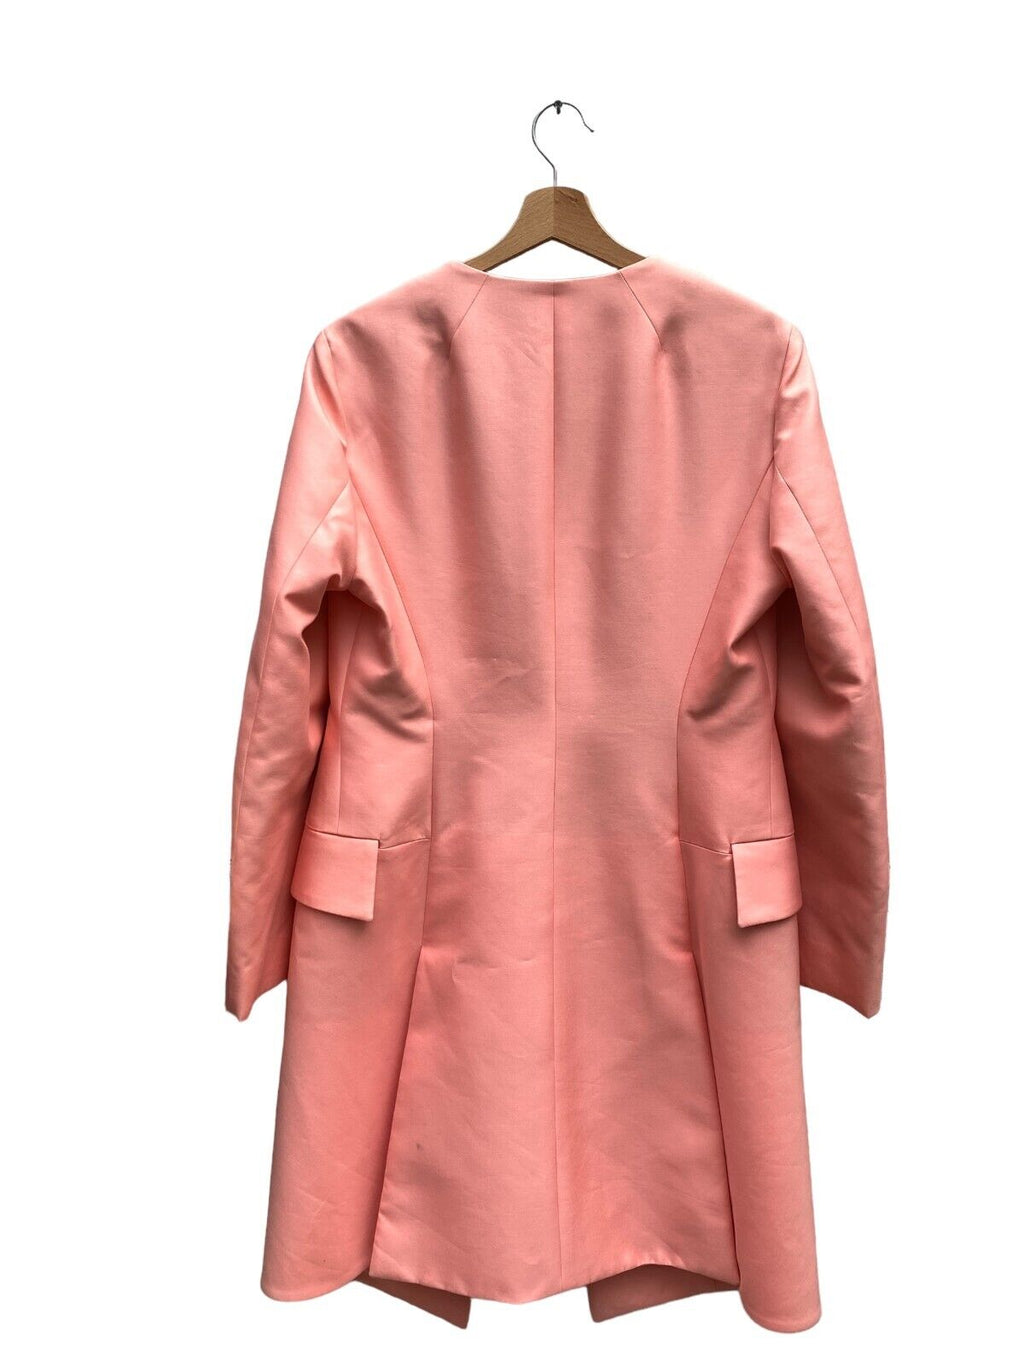 SS 2015 Runway Pale Pink Shapely Silk Blend Coat  Black Embroide